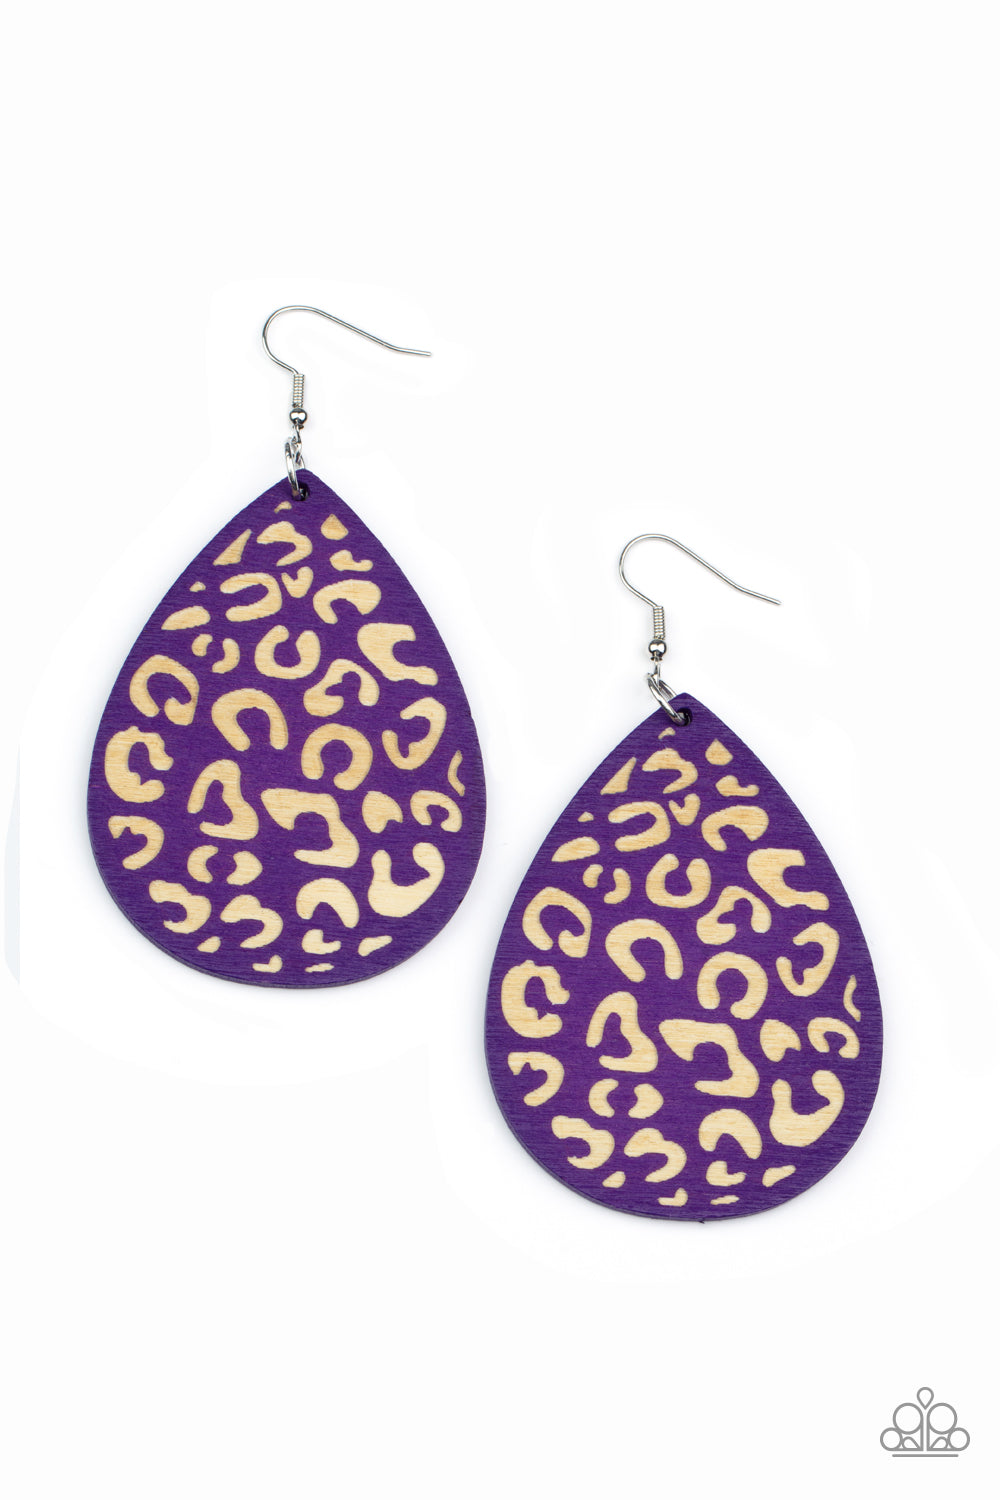 Suburban Jungle Purple Wooden Earring - Paparazzi Accessories  A purple wooden teardrop frame is etched in a cheetah-like pattern, creating a wildly fabulous fashion. Earring attaches to a standard fishhook fitting.  Sold as one pair of earrings.